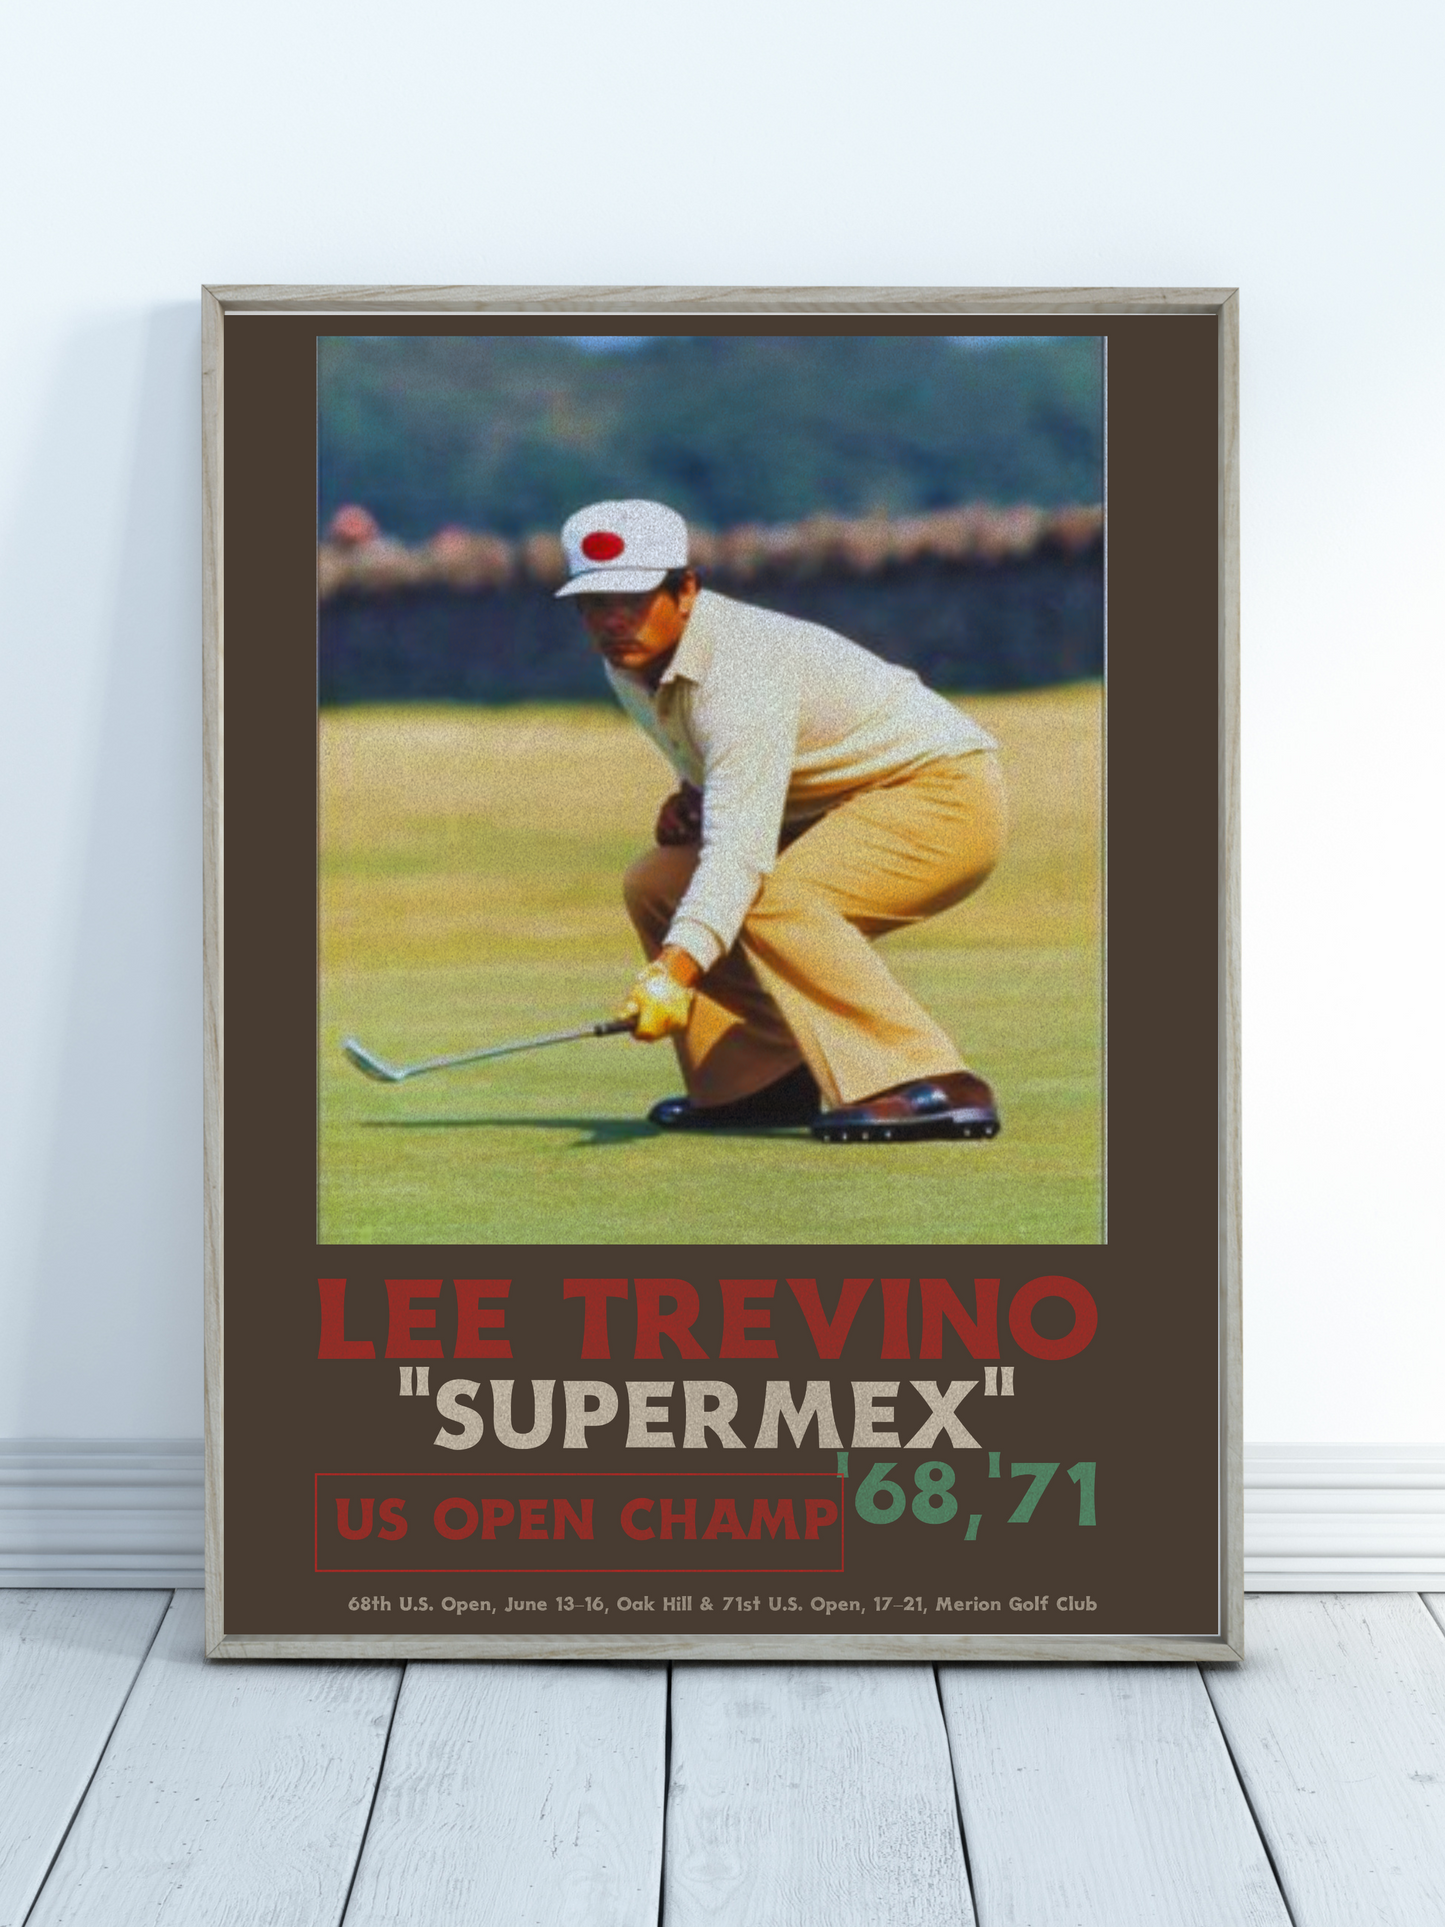 Lee Trevino "Supermex" US Open Poster